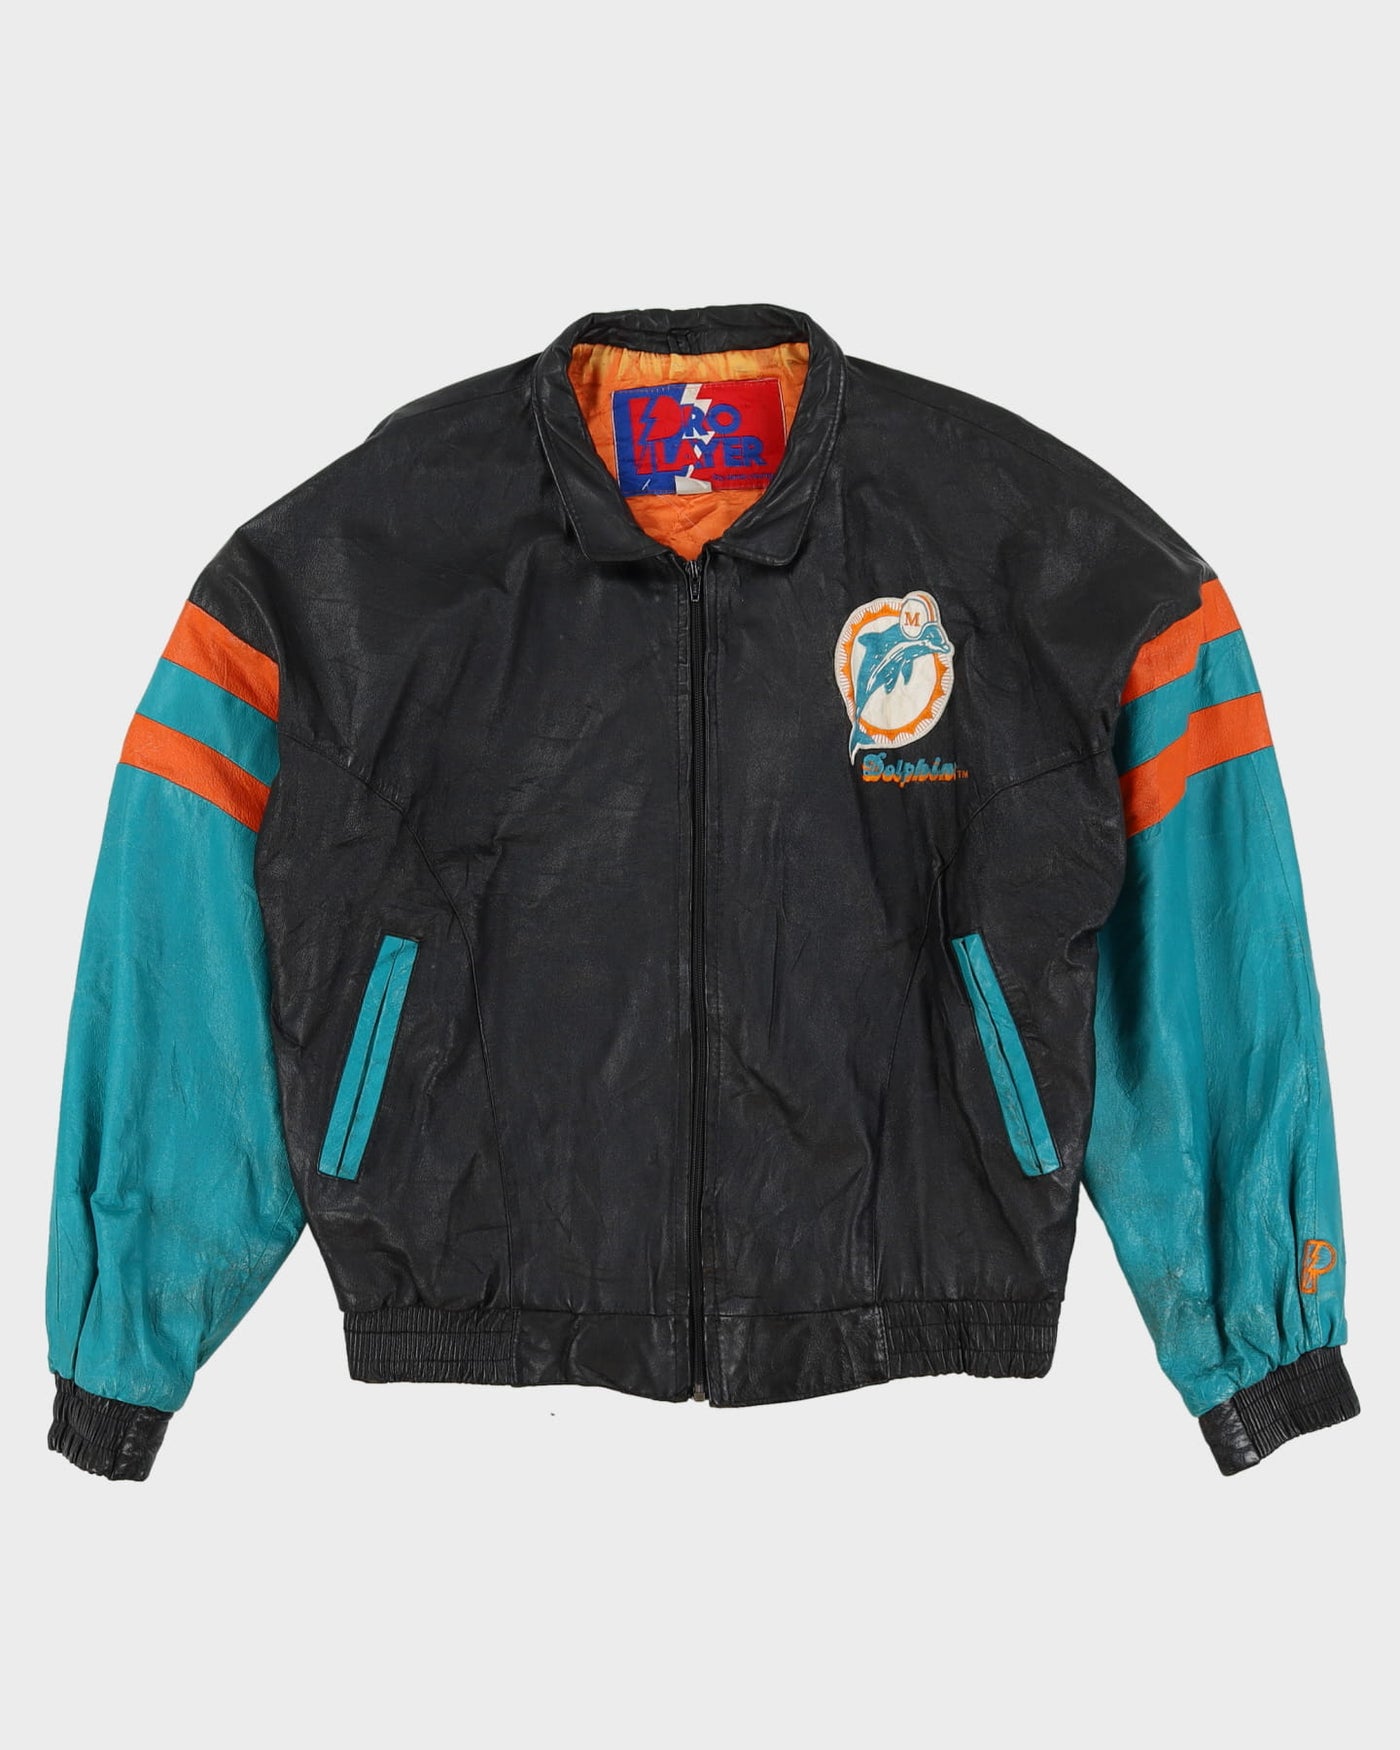 90s NFL Miami Dolphins Pro Player Daniel Young Black Leather Jacket - XL